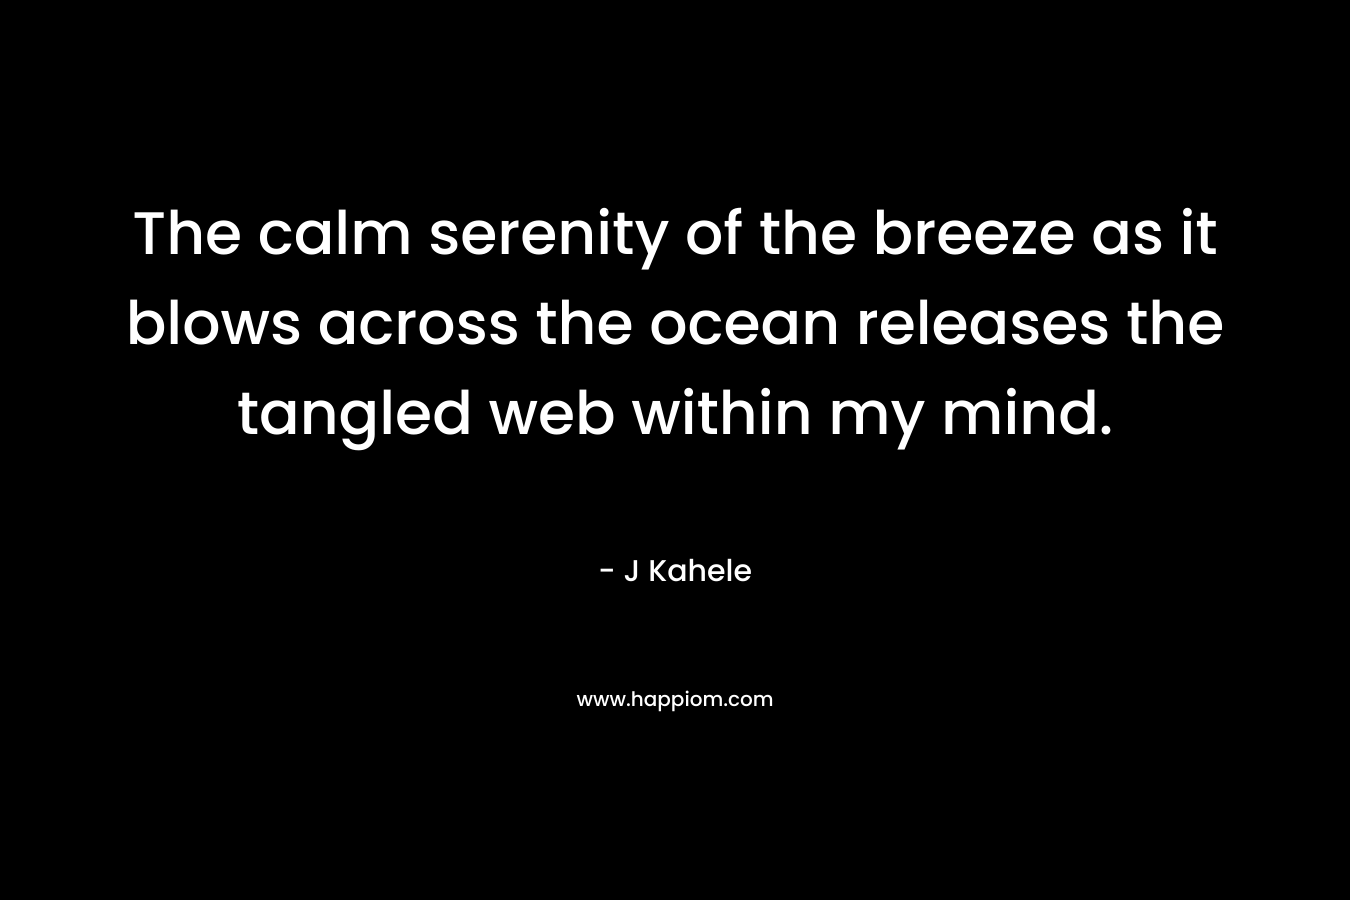 The calm serenity of the breeze as it blows across the ocean releases the tangled web within my mind. – J Kahele